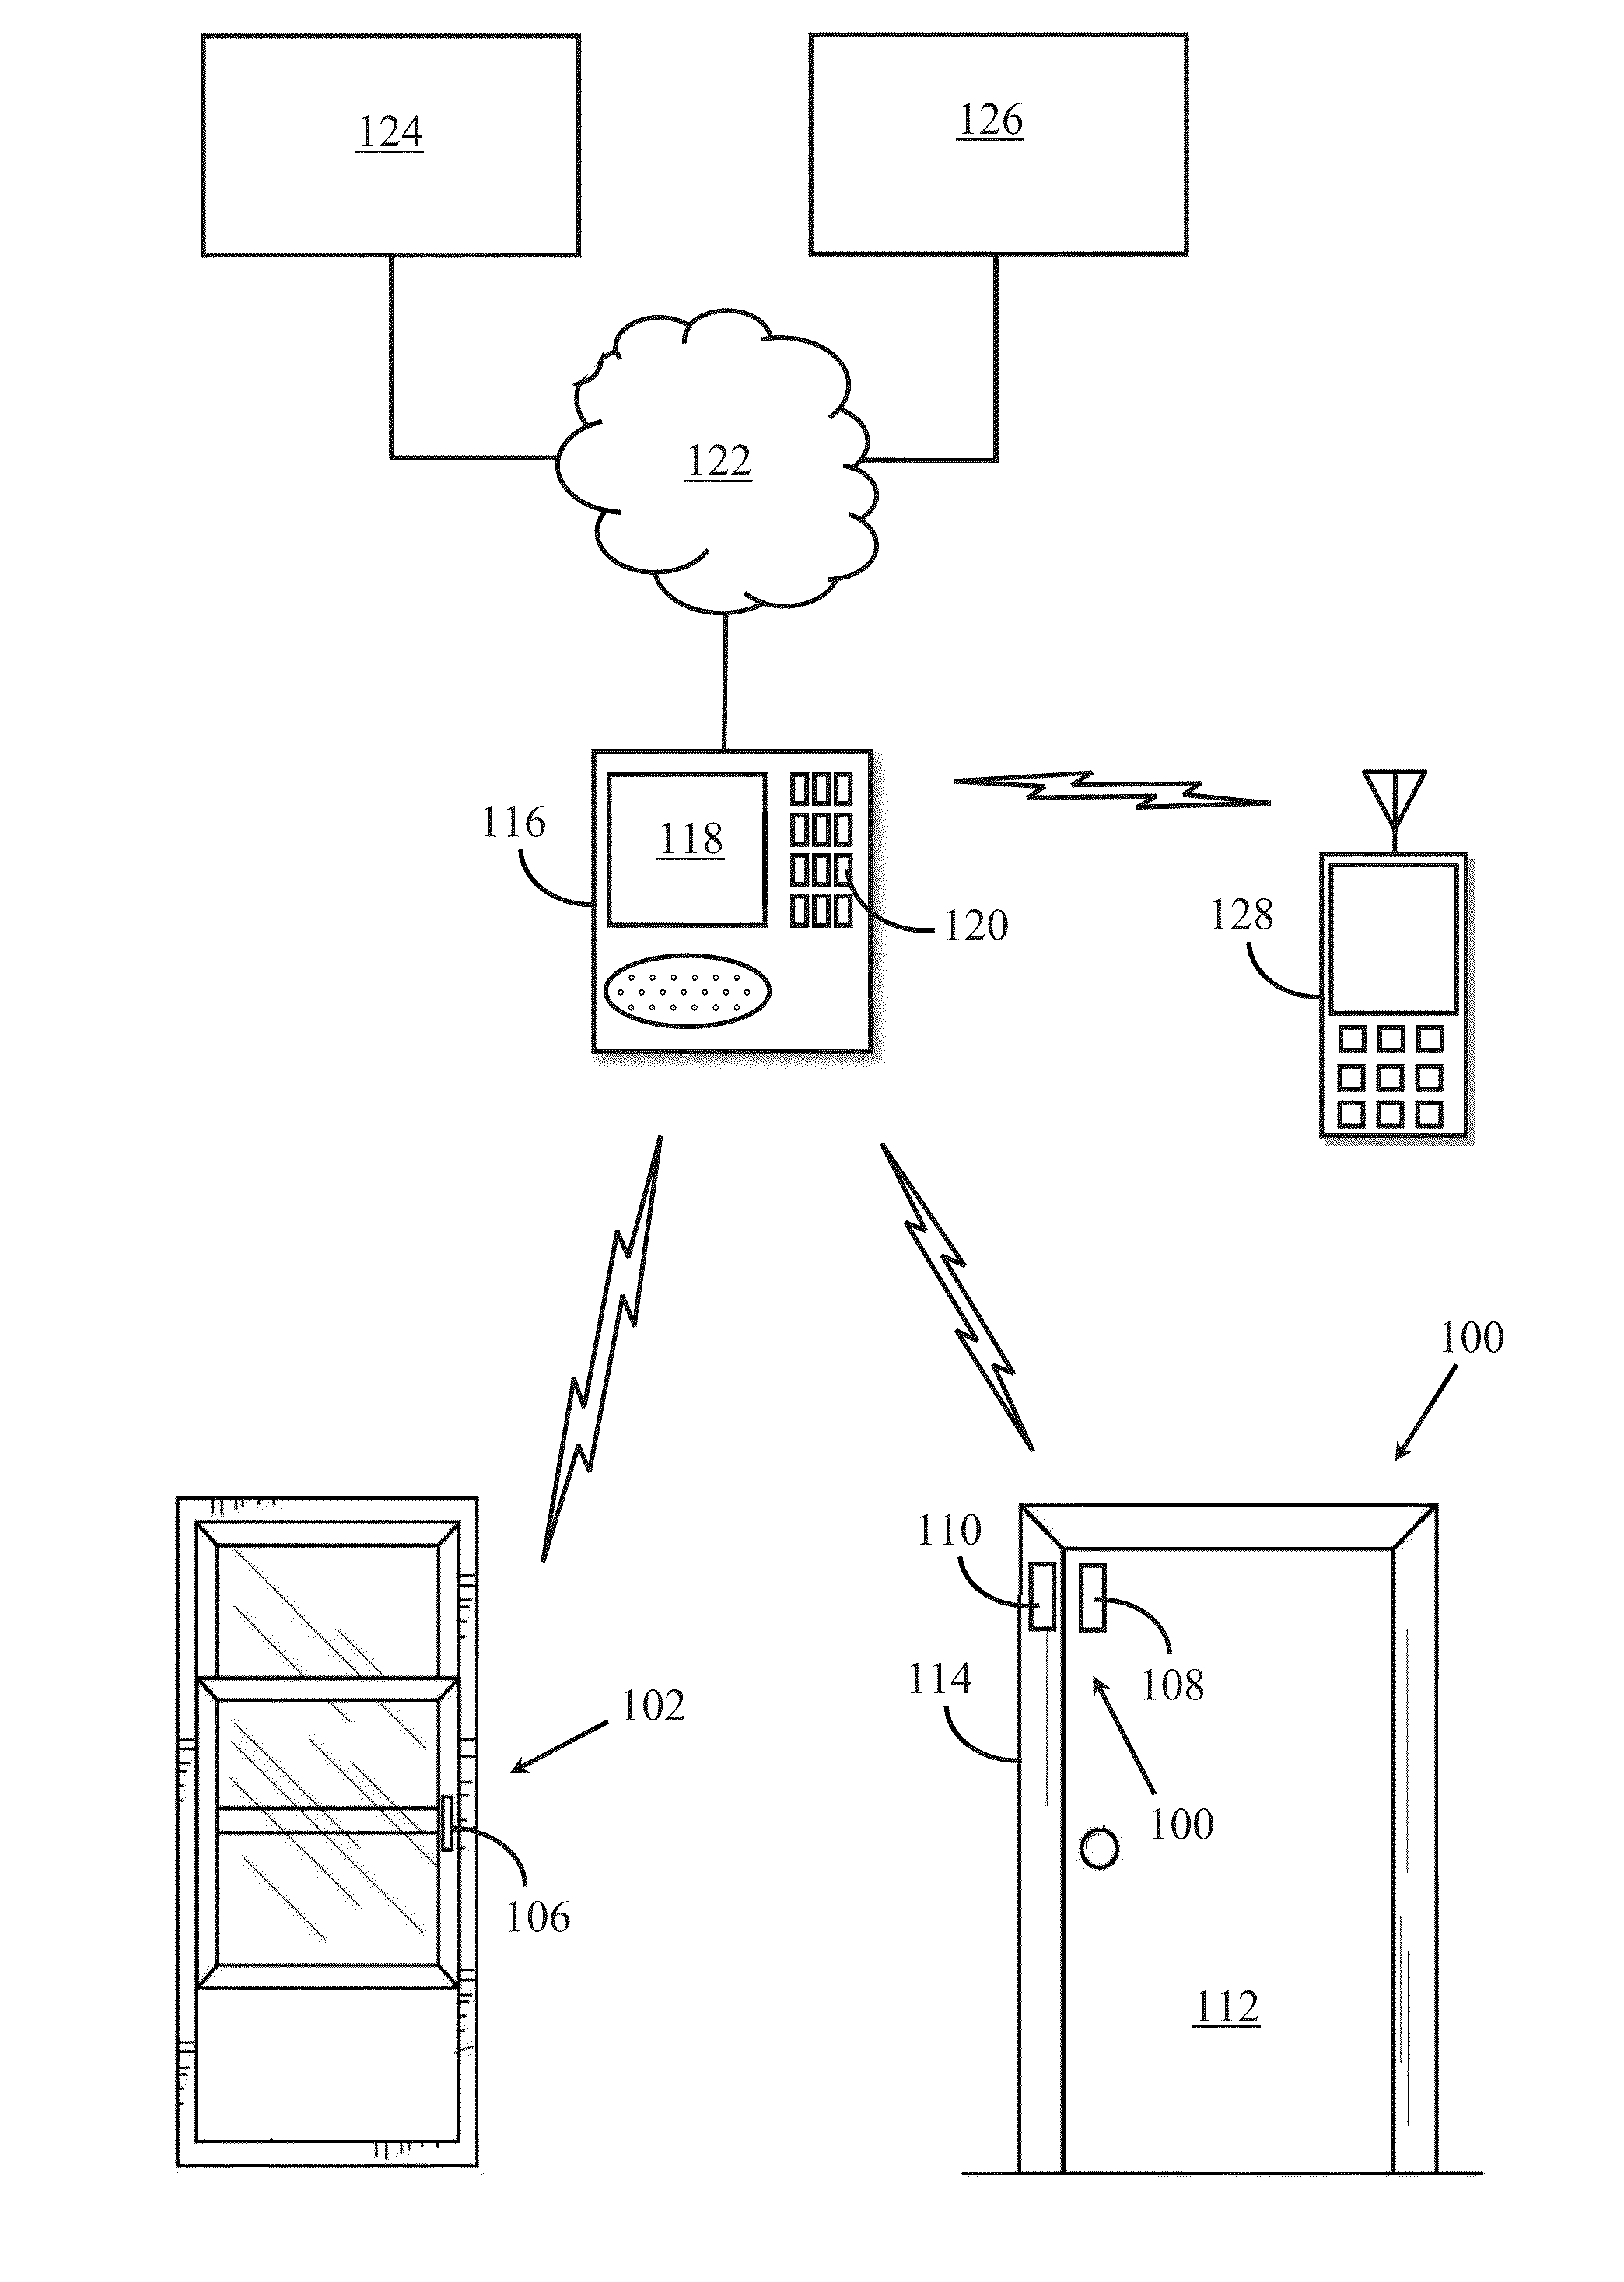 Temporary security bypass method and apparatus